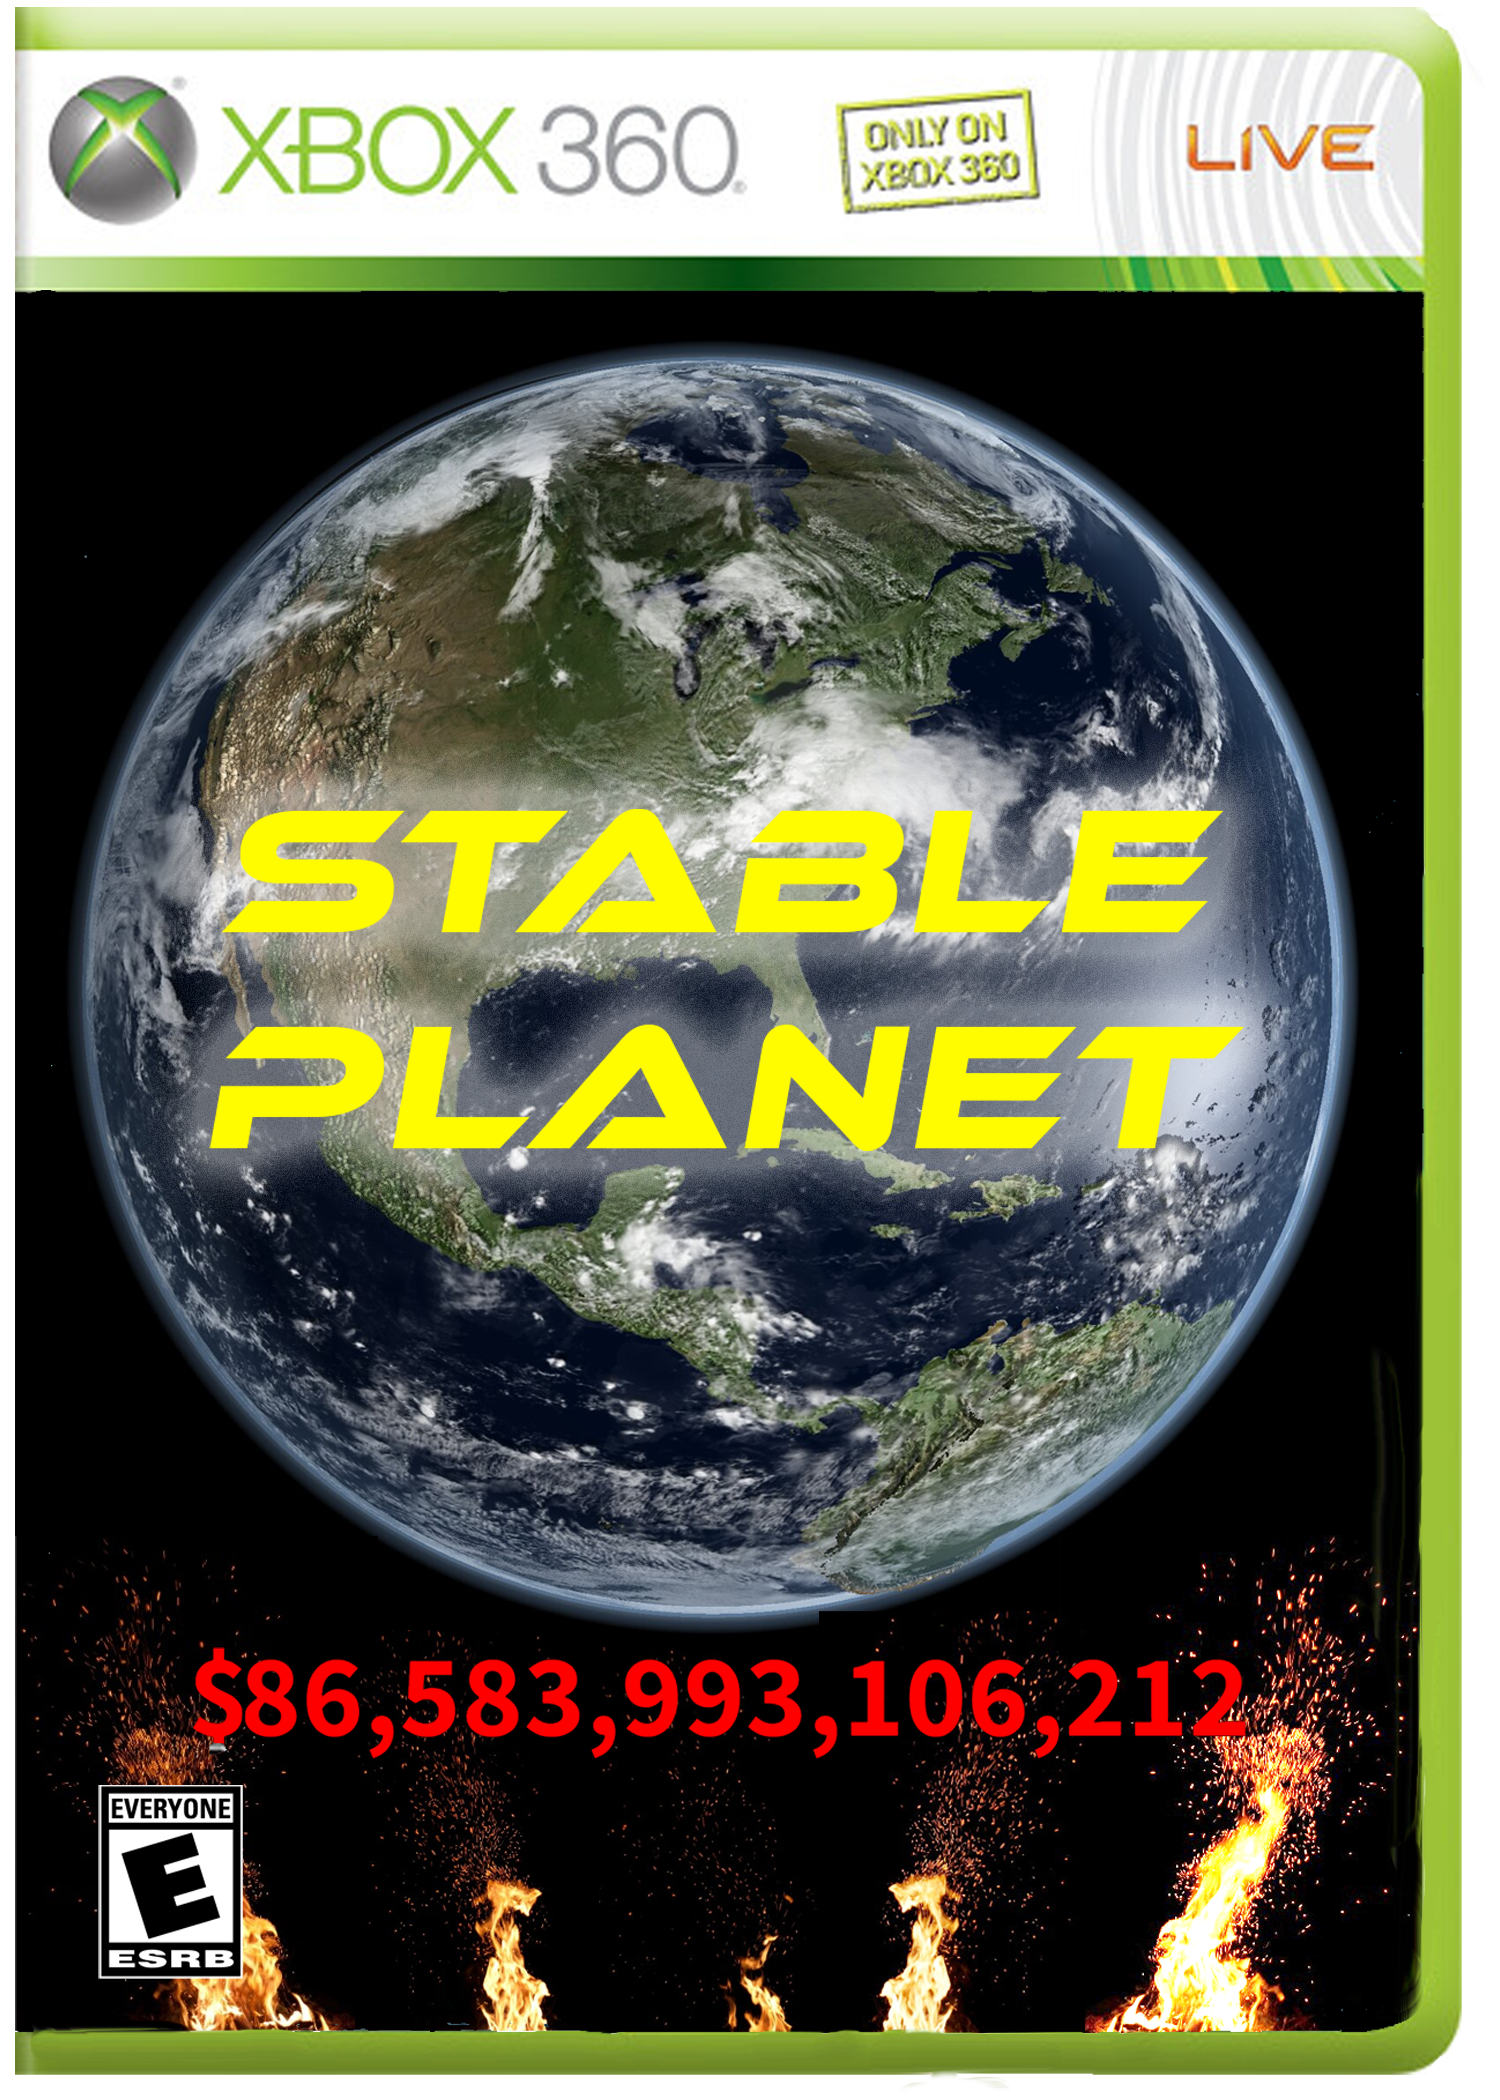 Mockup Xbox game cover for the hypothetical game "Stable Planet" inspired by CASSE's position on economic growth.